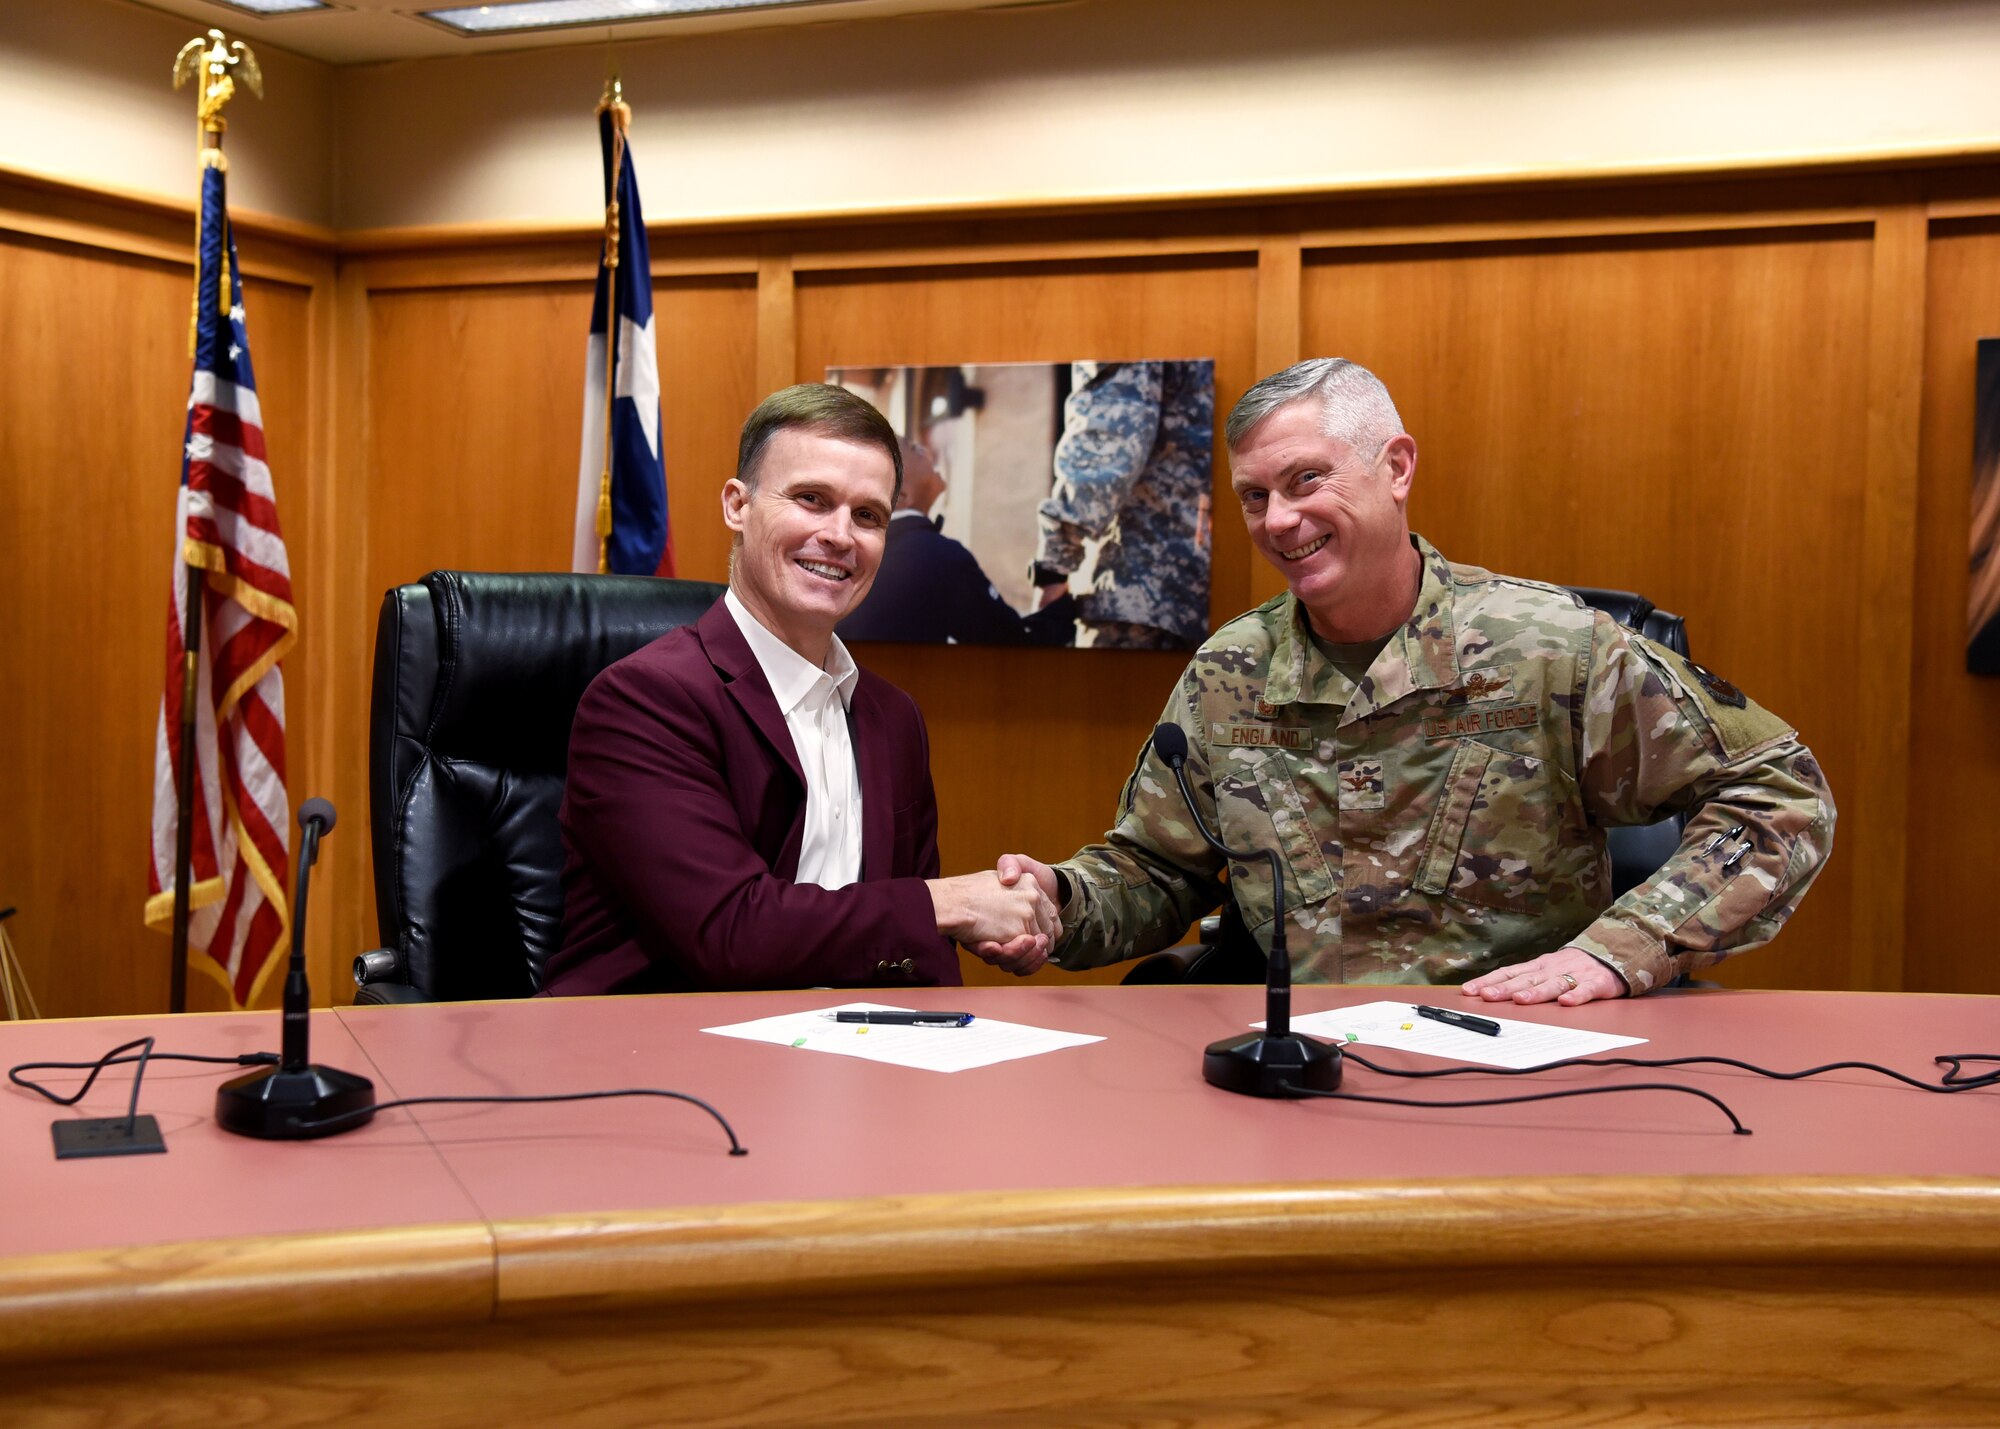 Superintendent of Schools Dr. Carl Dethloff and U.S. Air Force Col. Tony England, 17th Mission Support Group commander, shake hands after signing a memorandum of agreement, manifesting the 17th Training Wing to share vehicle mechanics and technicians with SAISD inside the San Angelo Independent School District Administration Building, in San Angelo, Texas, Feb. 21, 2020. Mission permitting and space available, 17 Logistics Readiness Squadron will provide the labor to perform maintenance and inspections on SAISD support vehicles. (U.S. Air Force photo by Airman 1st Class Abbey Rieves)